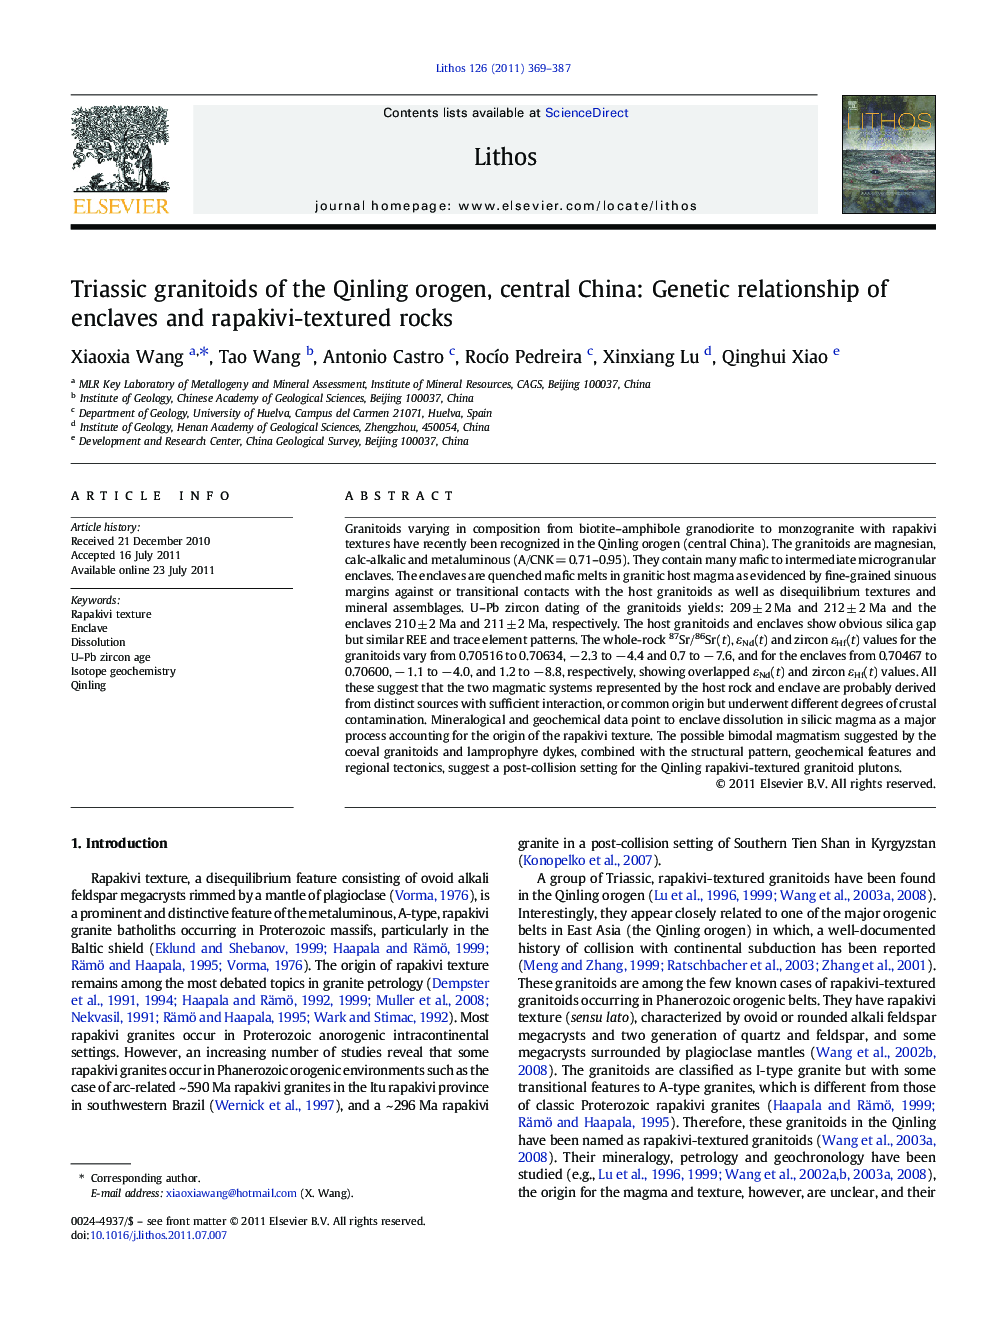 Triassic granitoids of the Qinling orogen, central China: Genetic relationship of enclaves and rapakivi-textured rocks